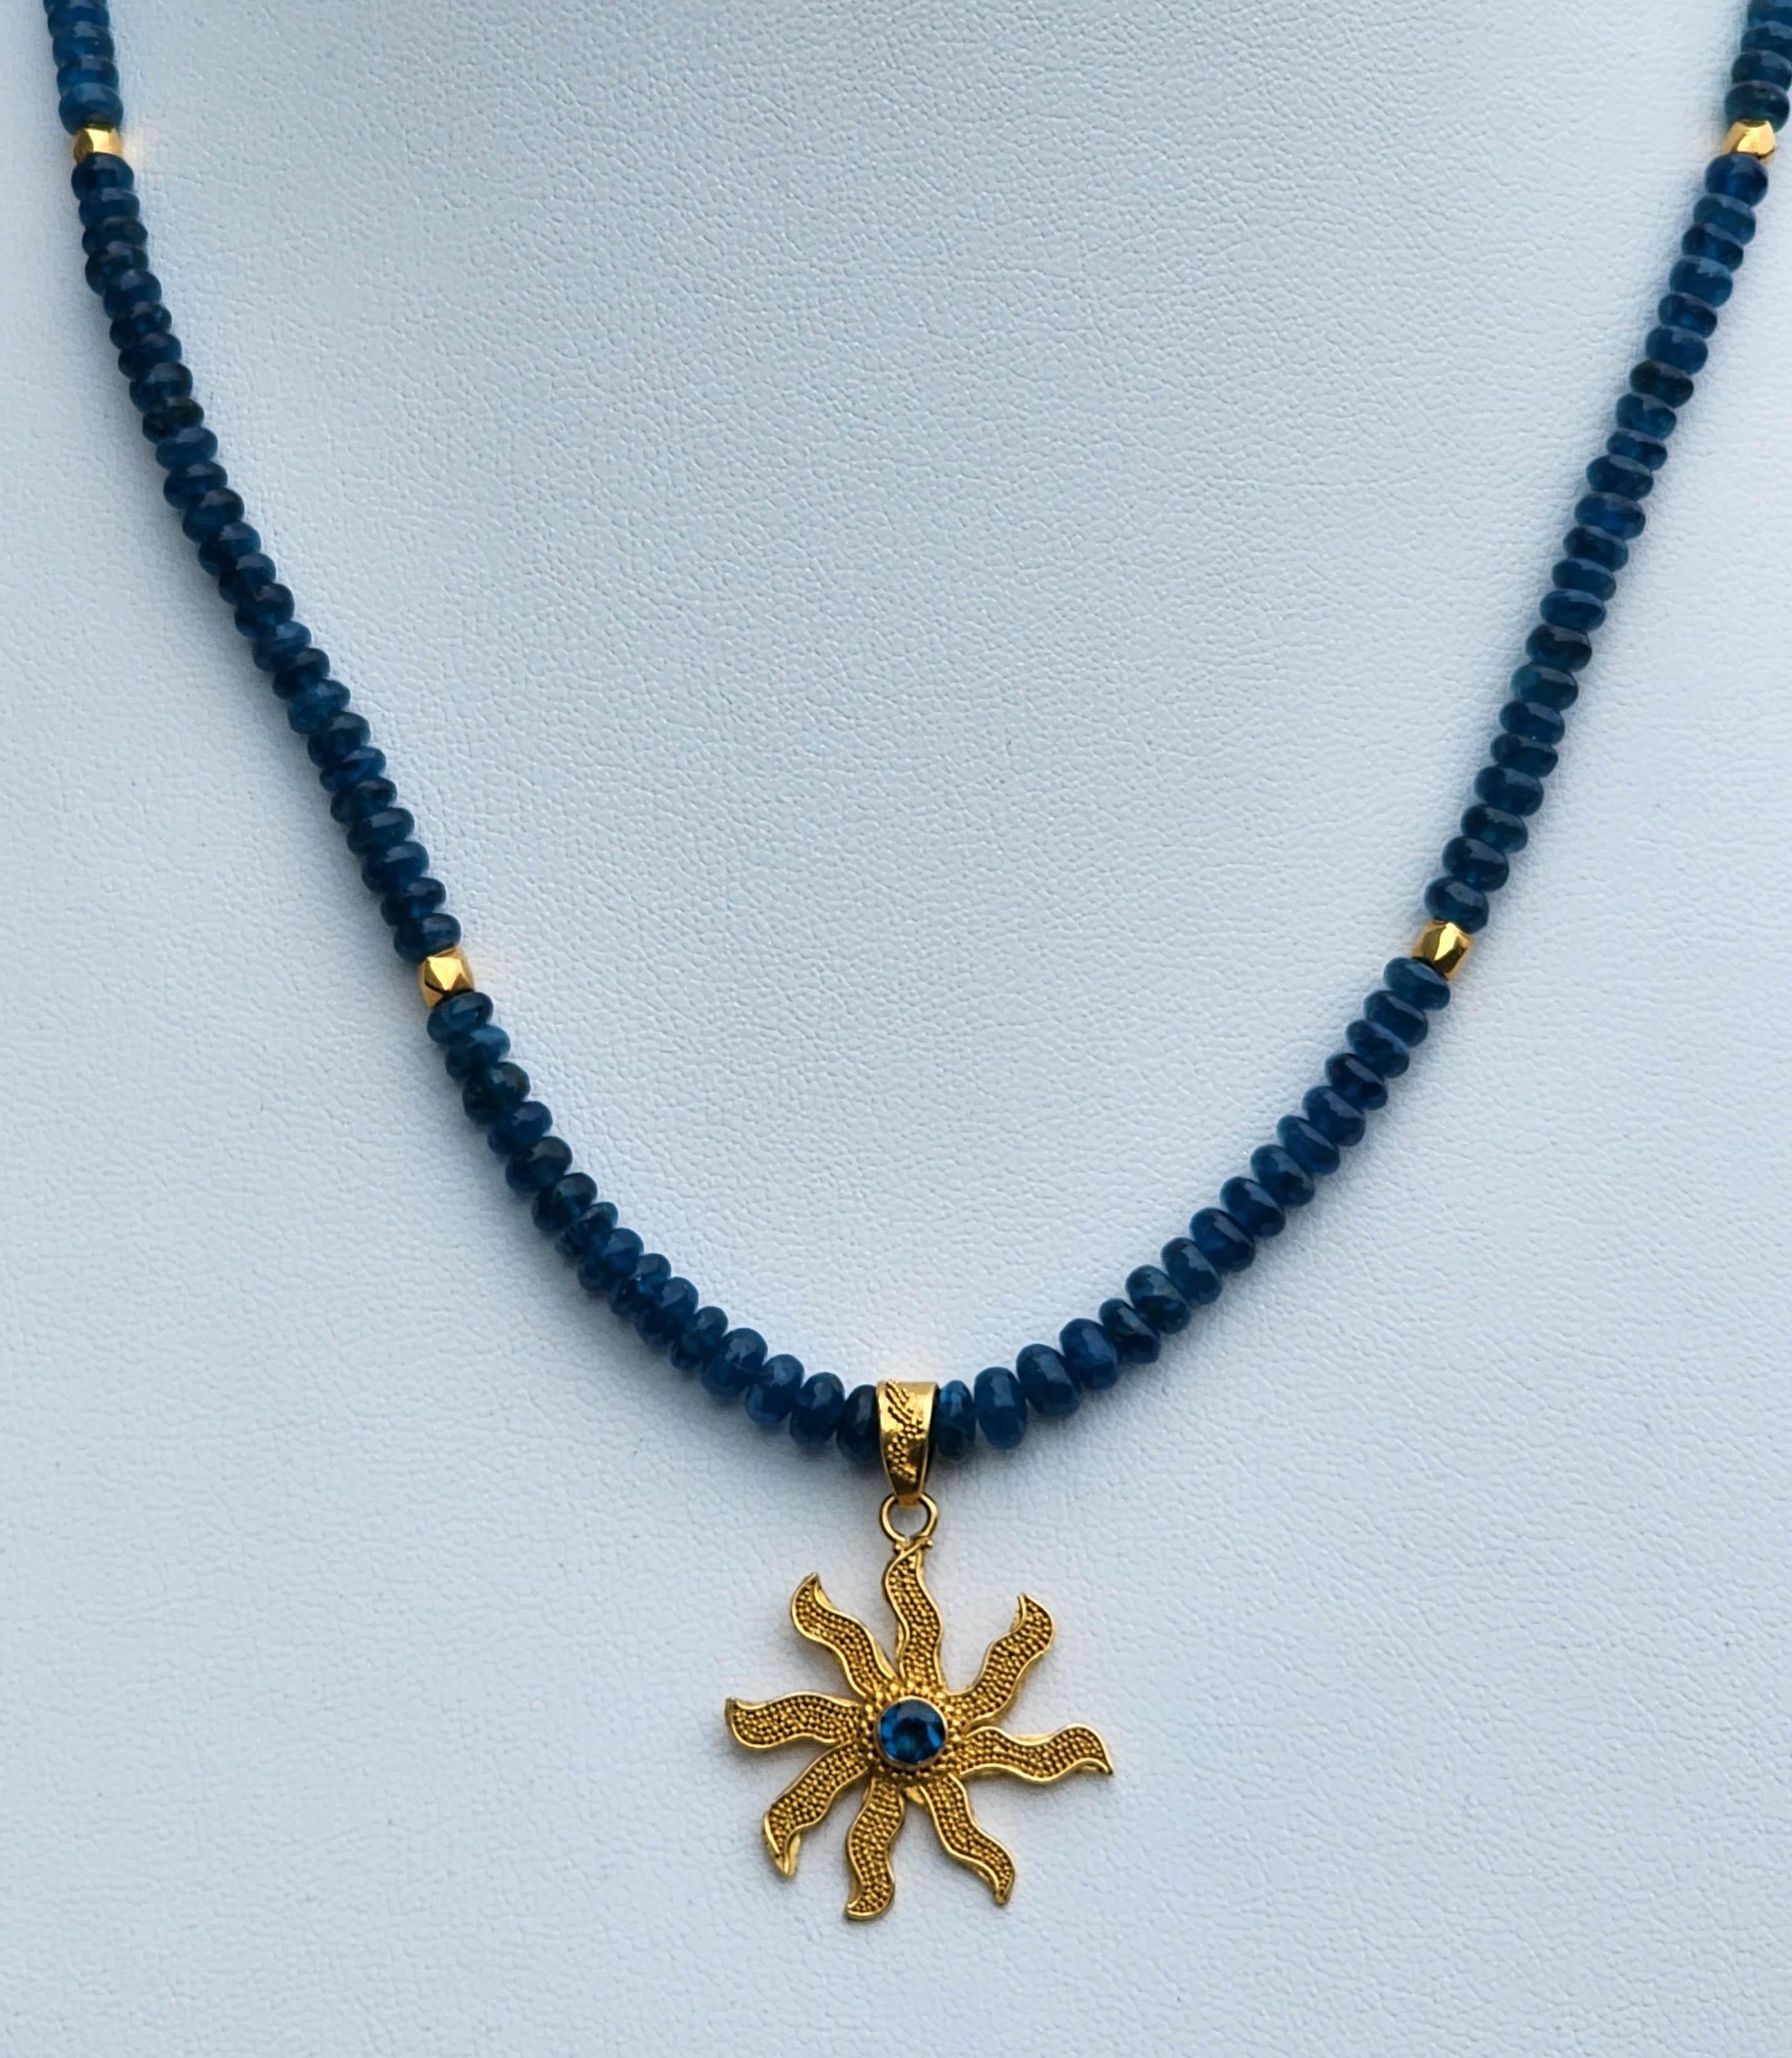 A Beaded Blue Fluorite Necklace of 20 inches with a Gold 